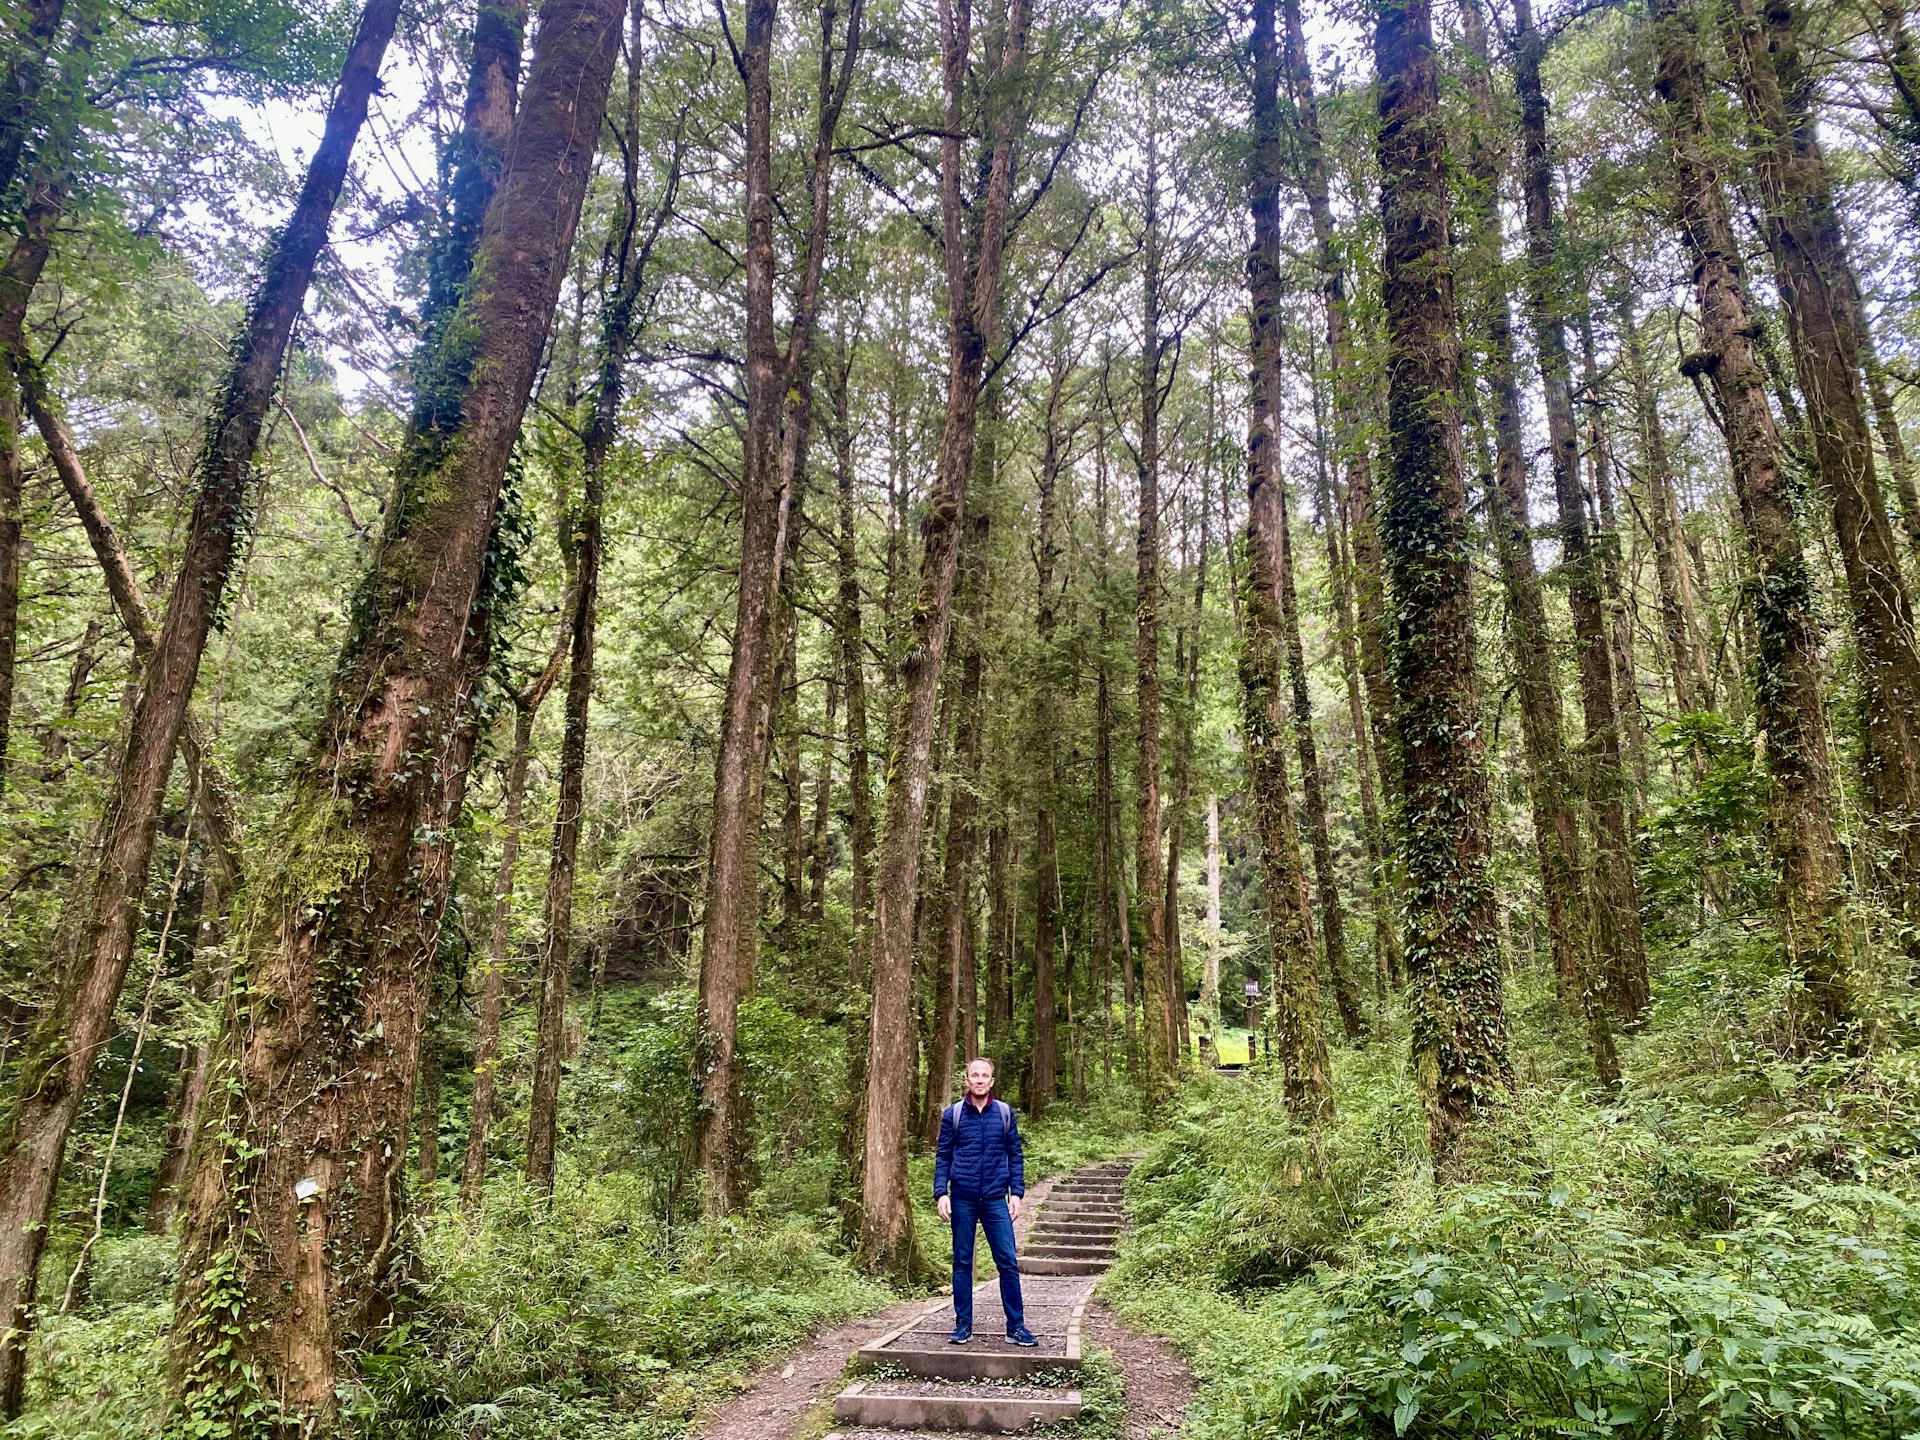 A hiker among towering trees on the Tashan Trail, Alishan Forest Recreation Area, Taiwan